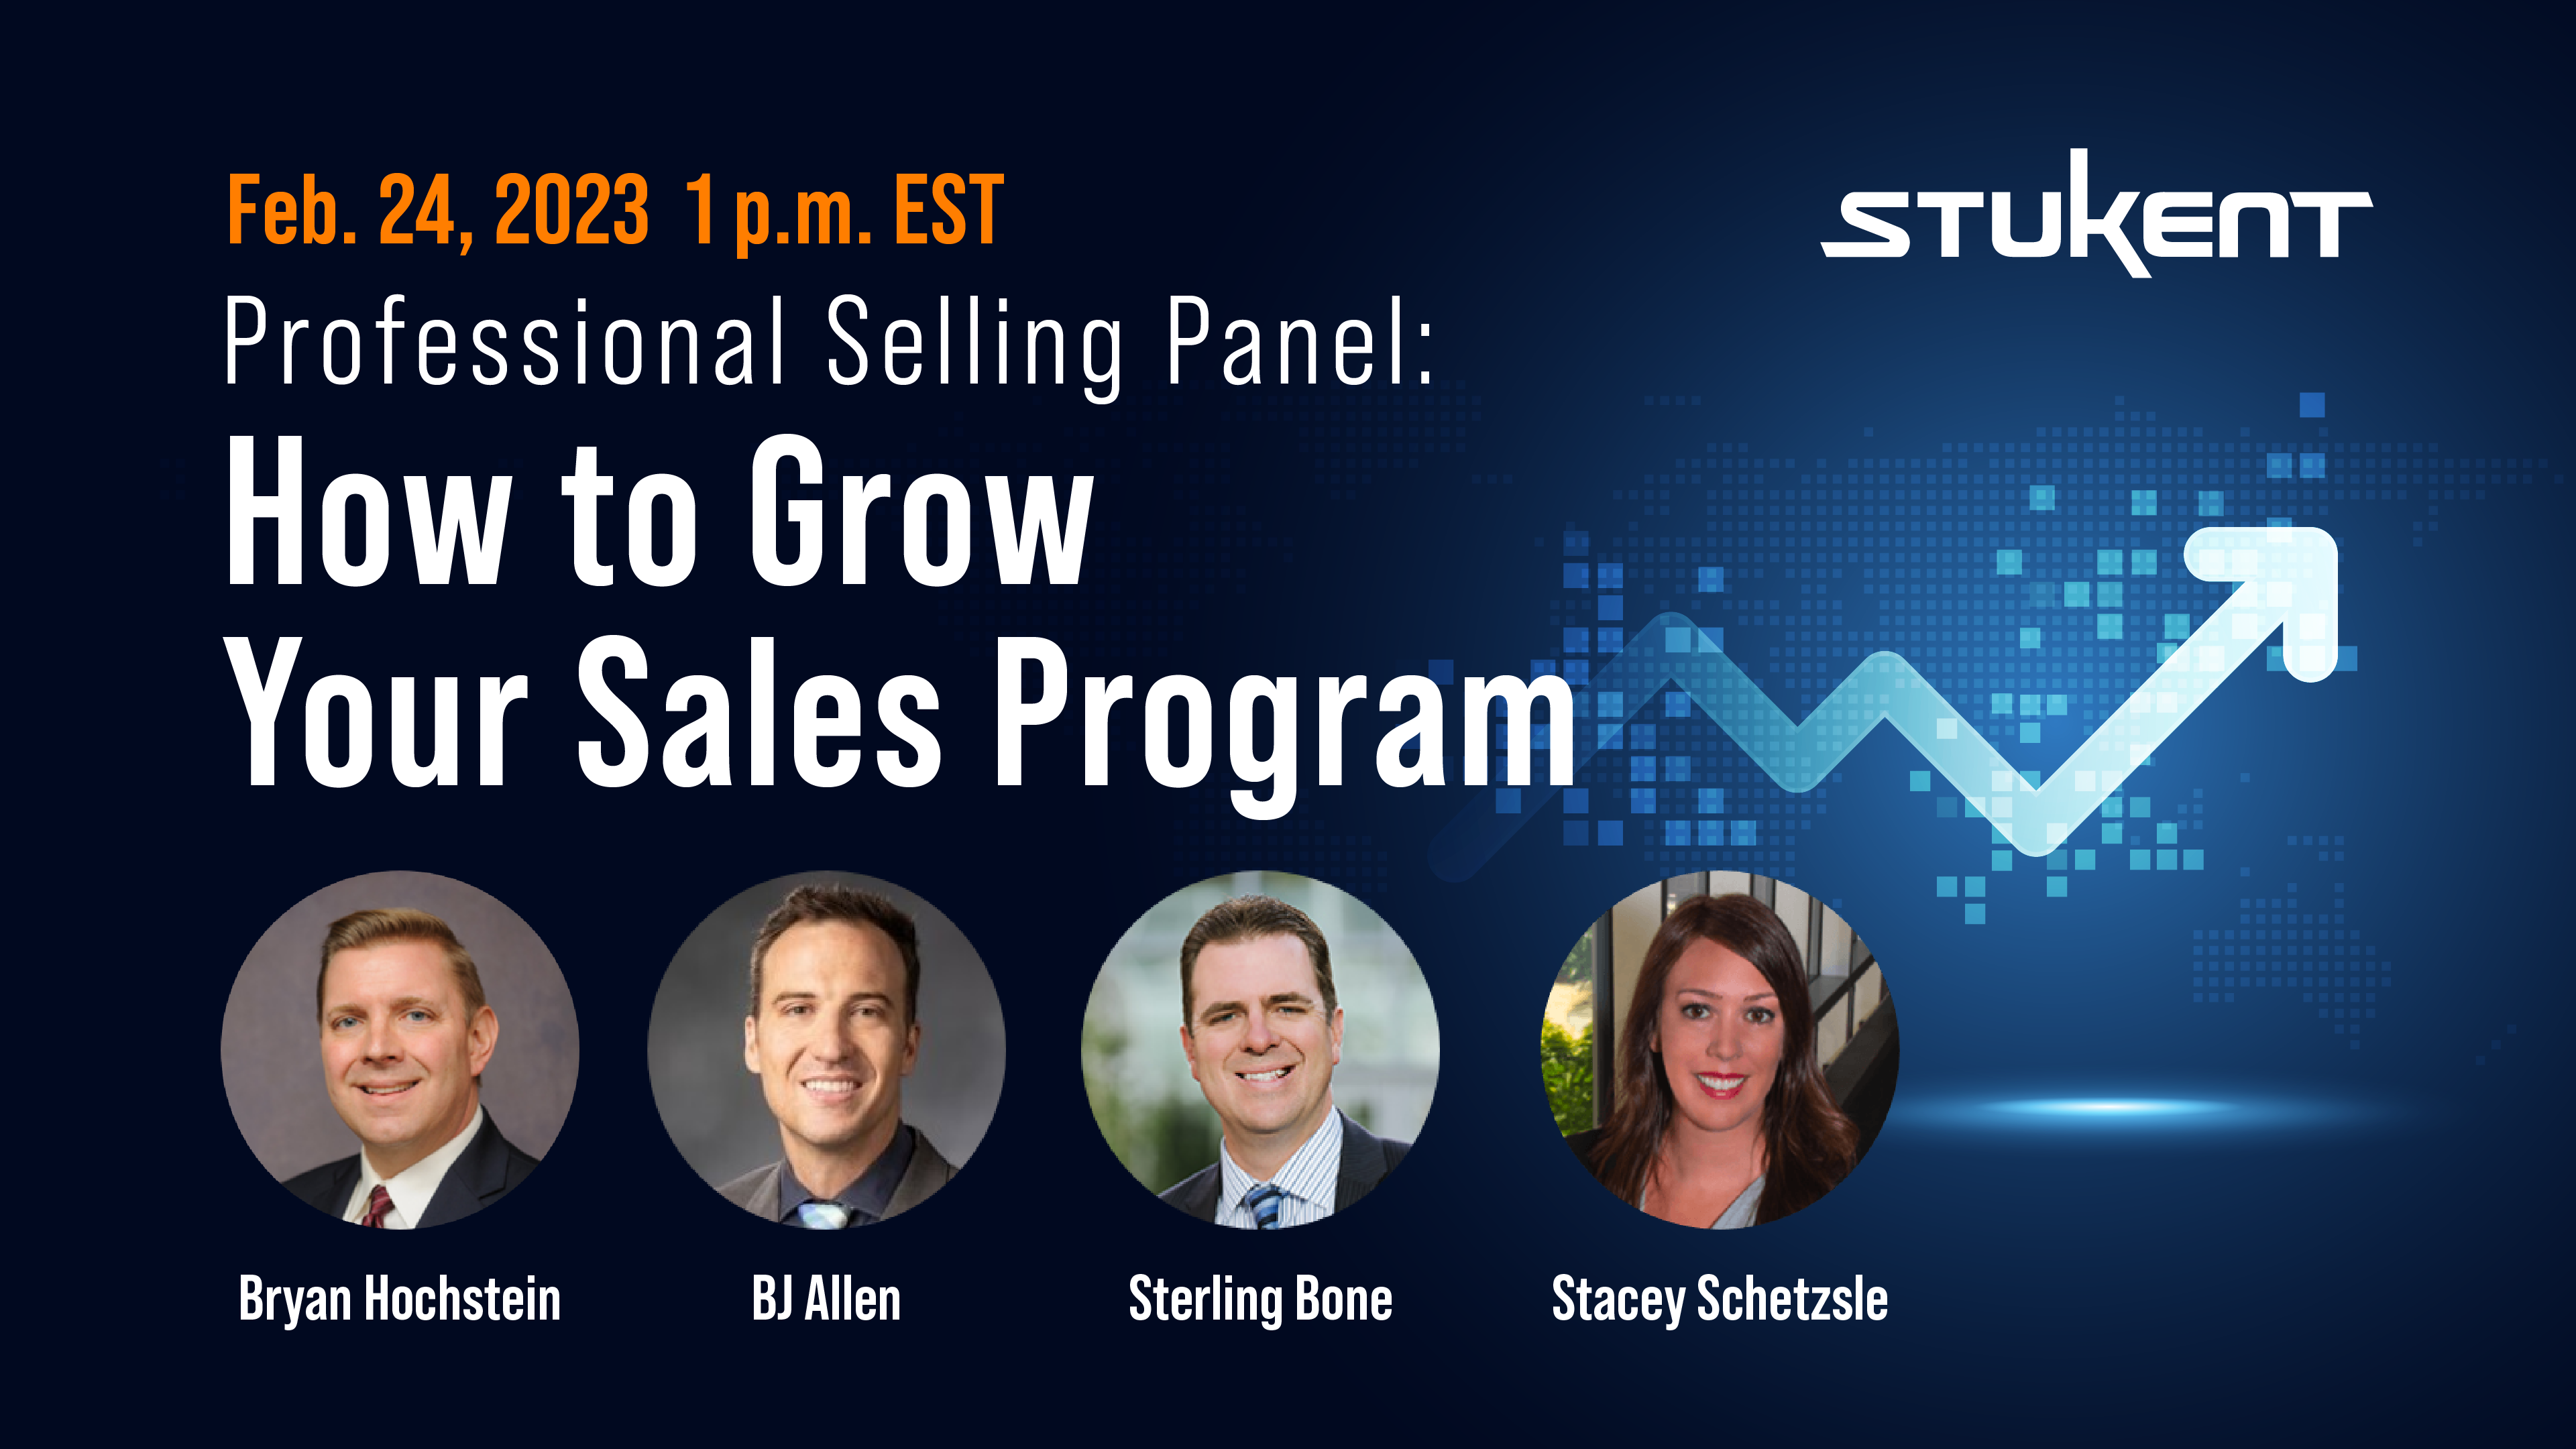 Professional Selling Panel: How to Grow Your Sales Program